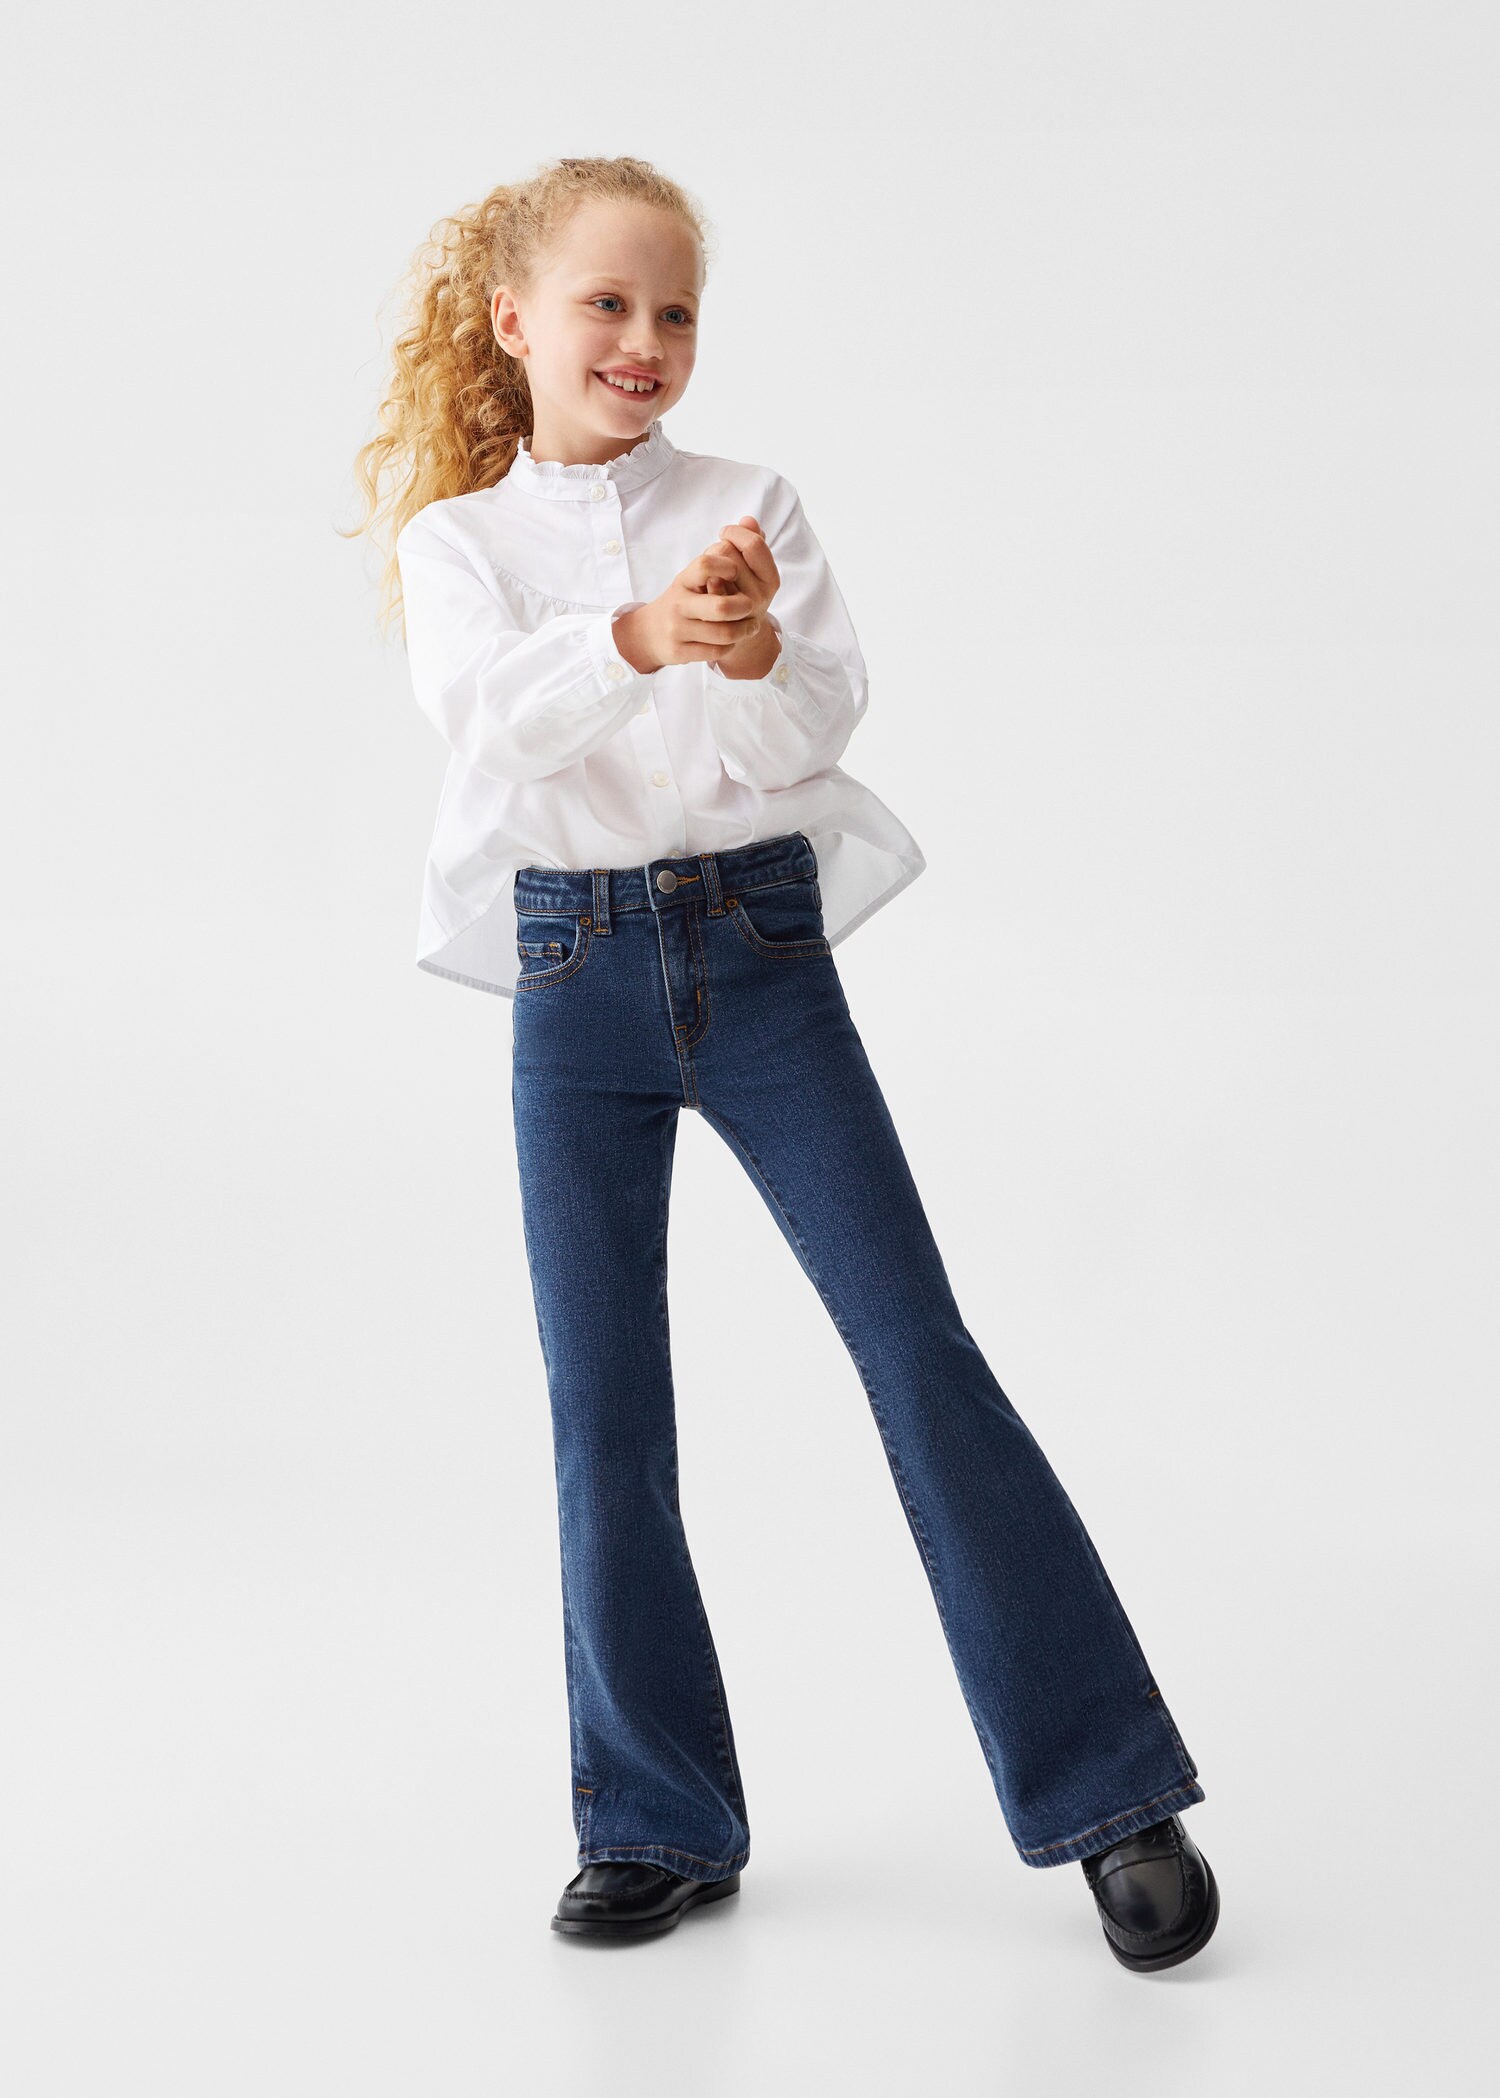 Girls Jeans | Buy Jeans for Girls Online in India